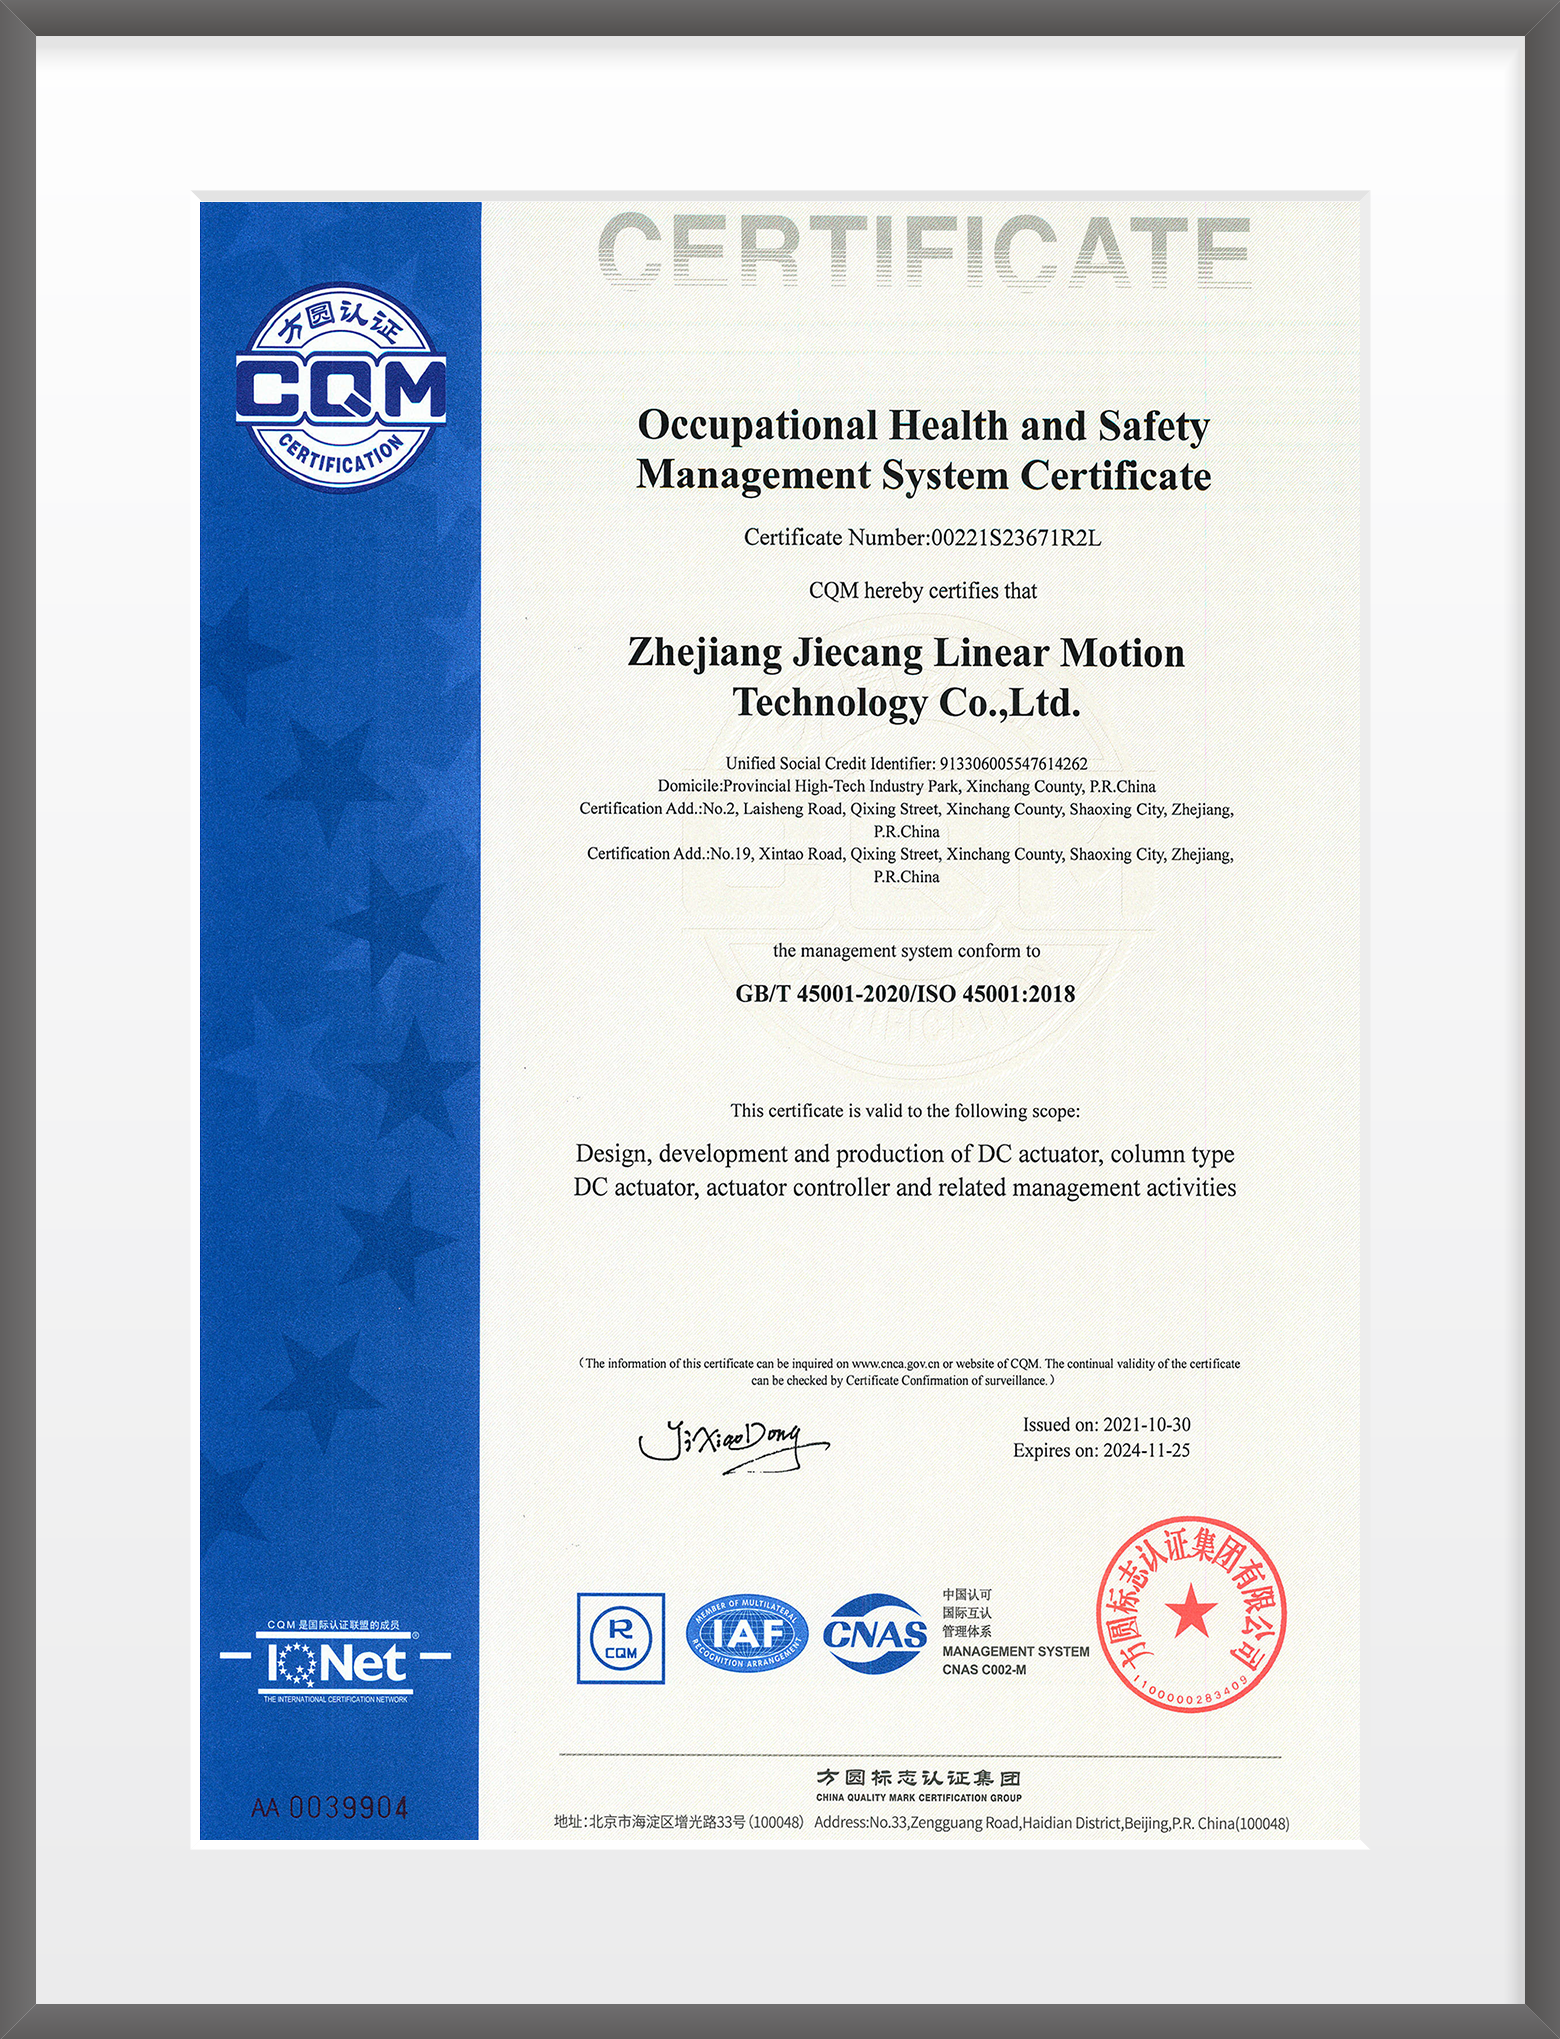 Occupational Health and Safety Management System Certificate - Jiechang+Heshikai